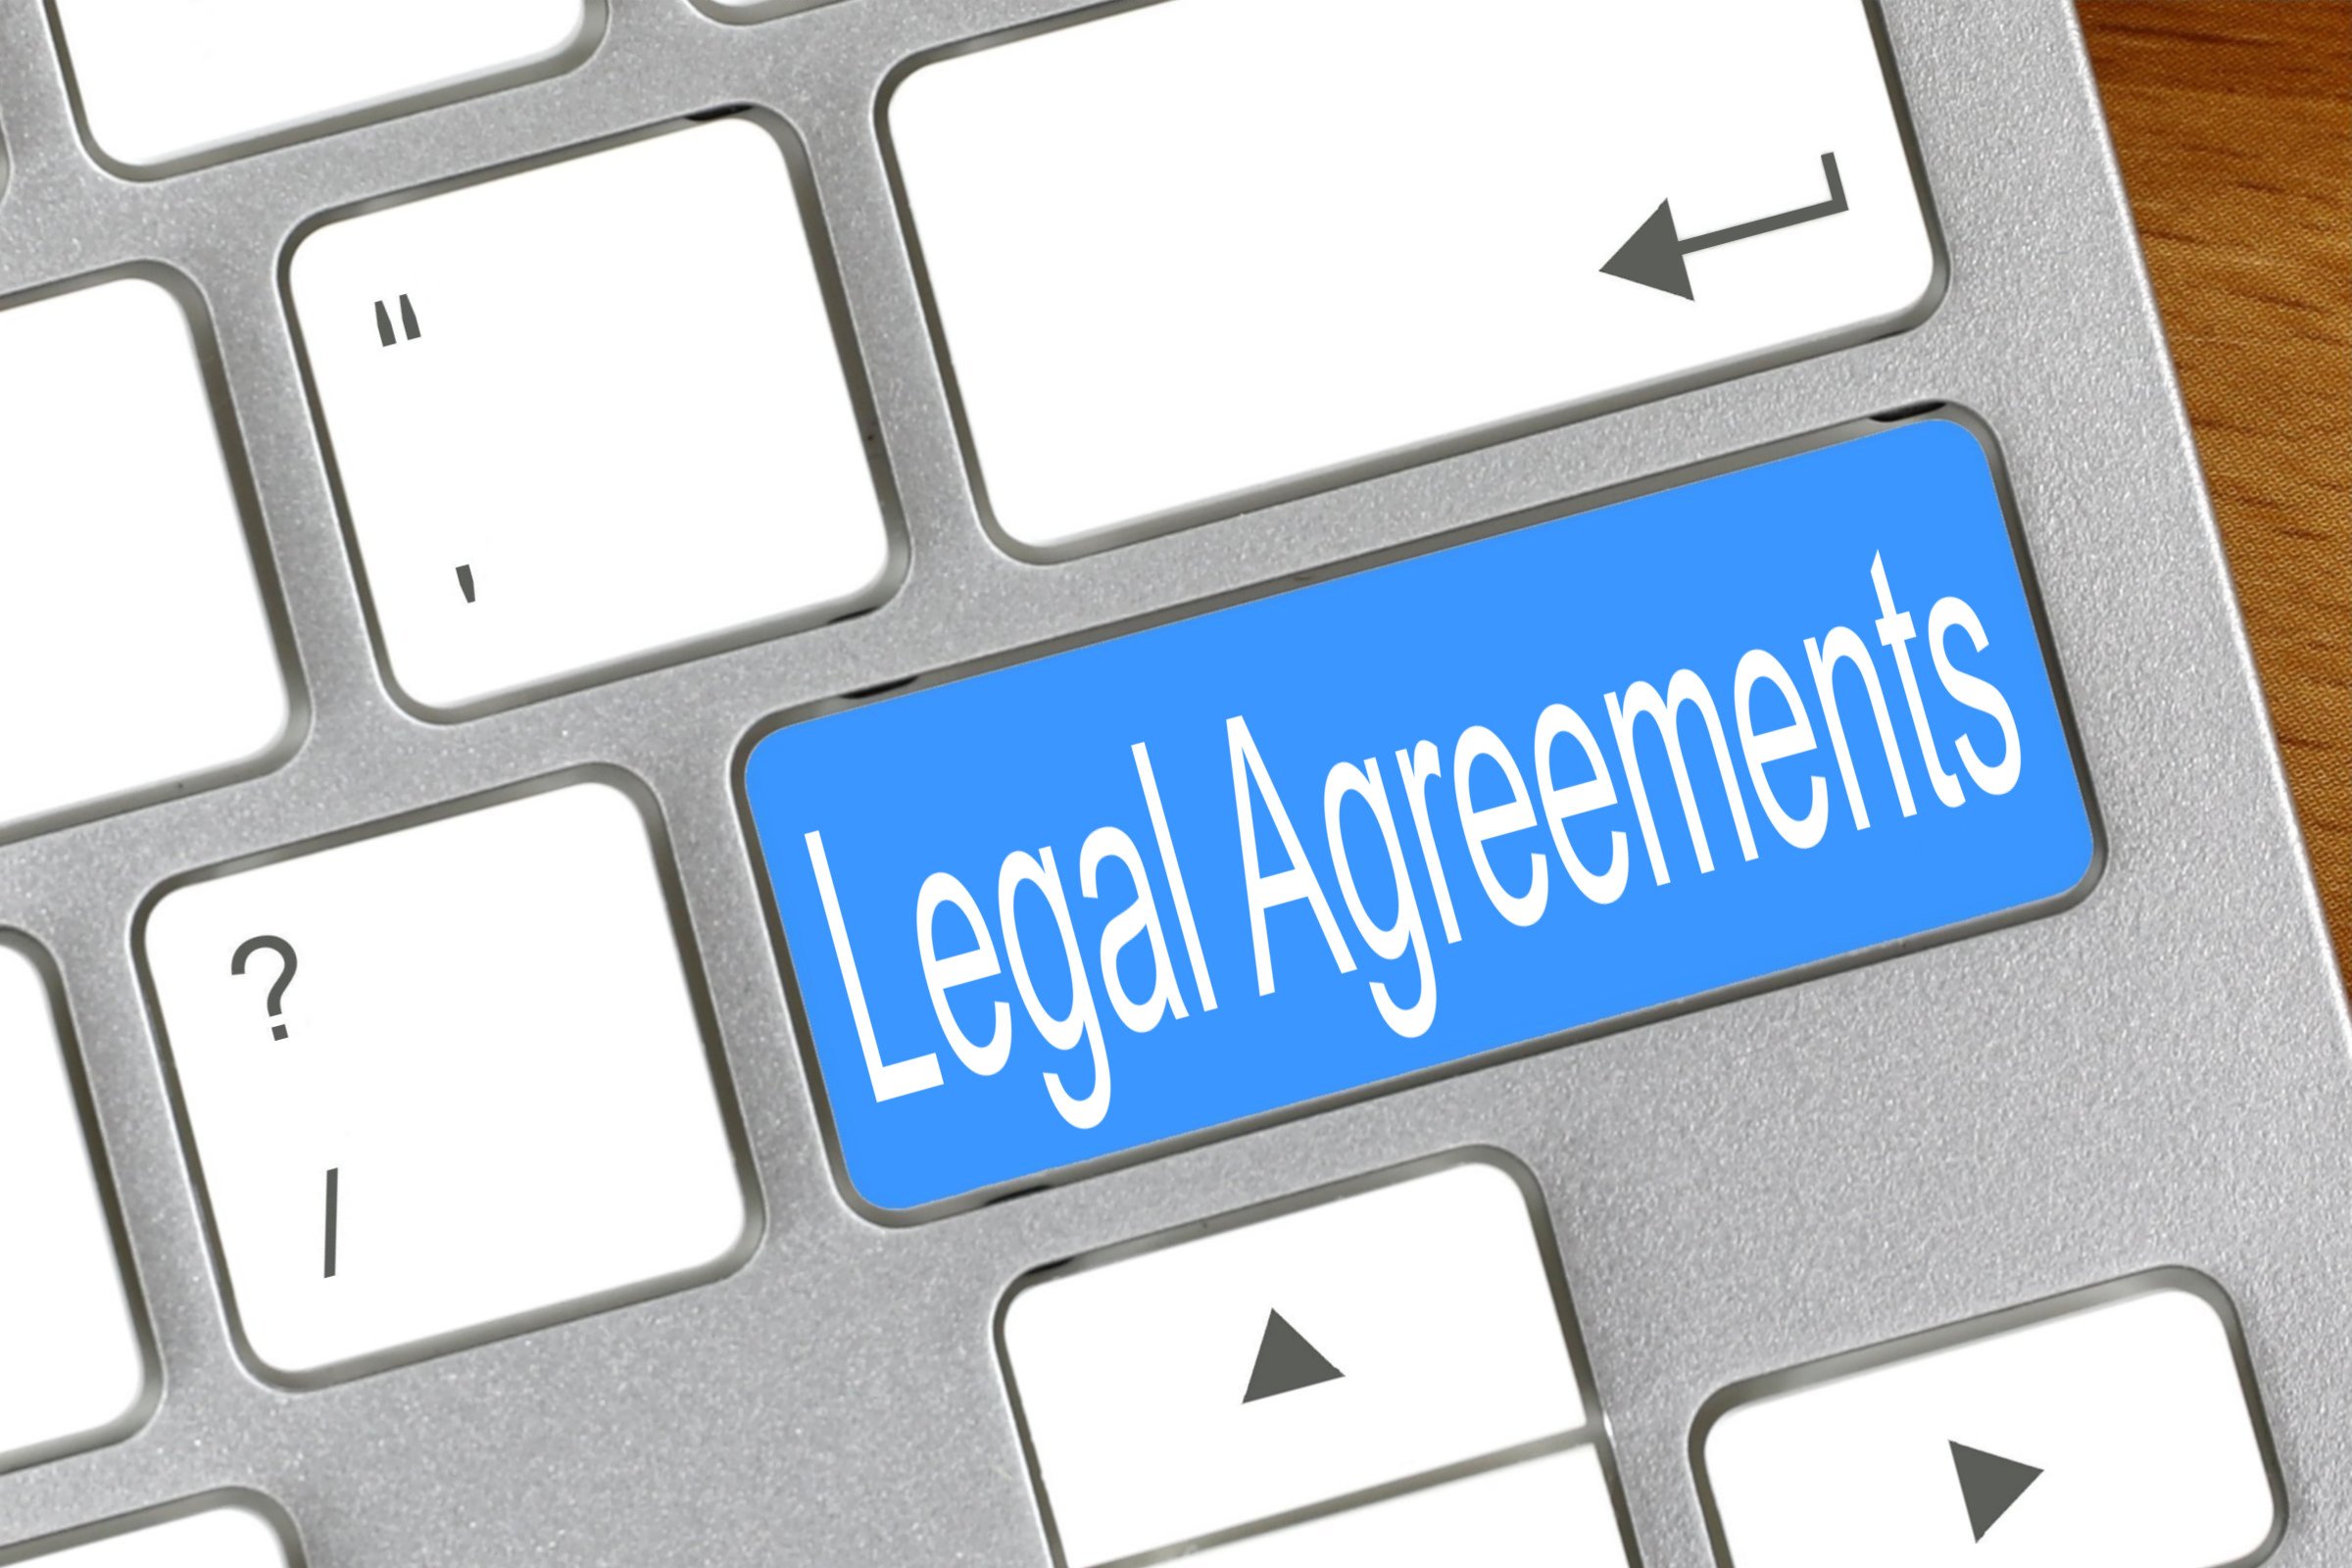 legal agreements